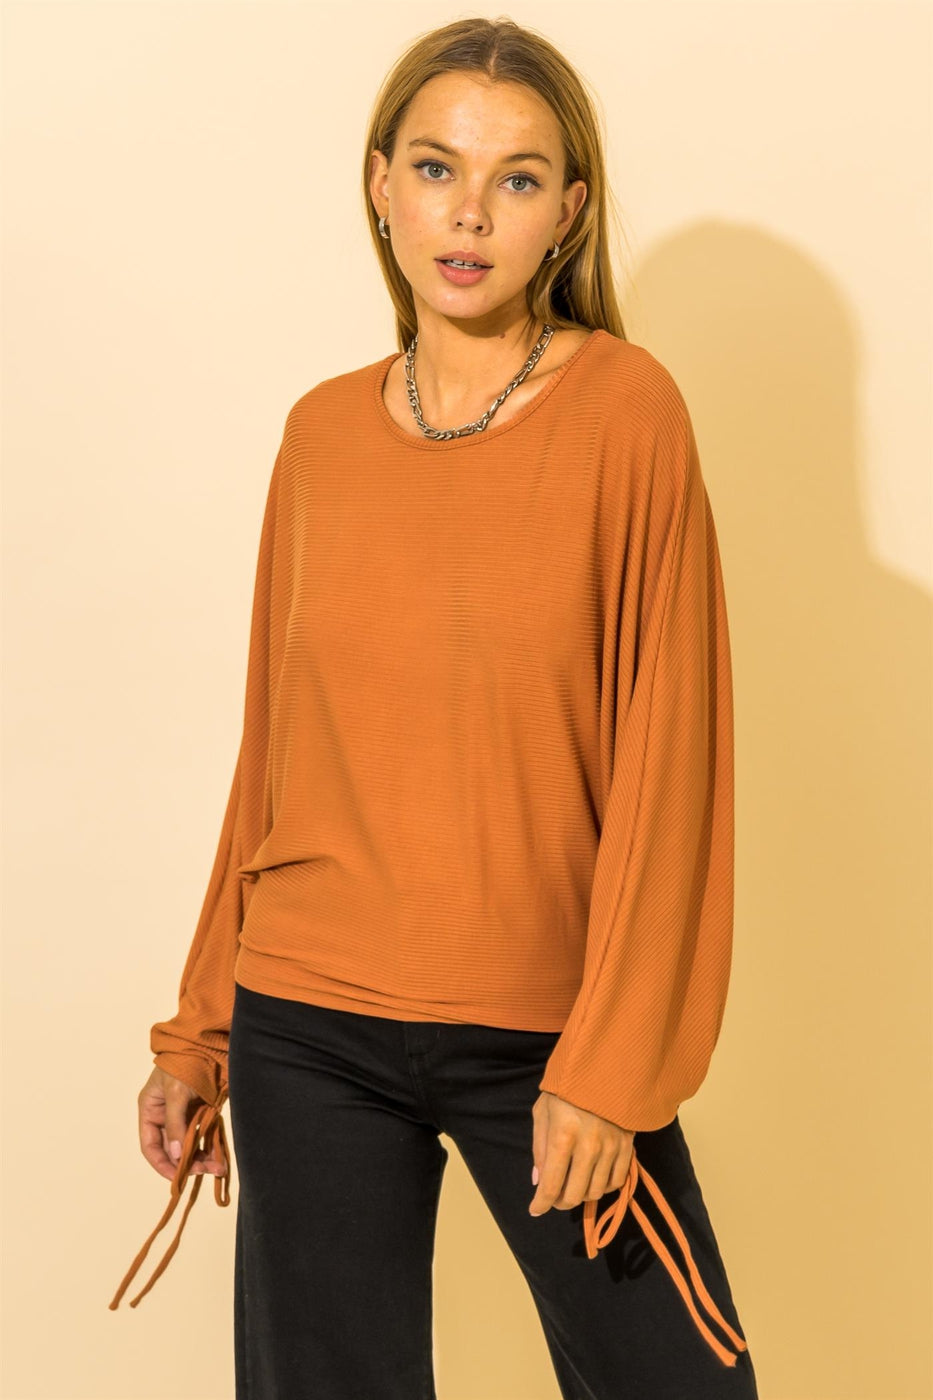 Top, Long-Sleeves w/wrist ties, Relaxed Fit, Rust